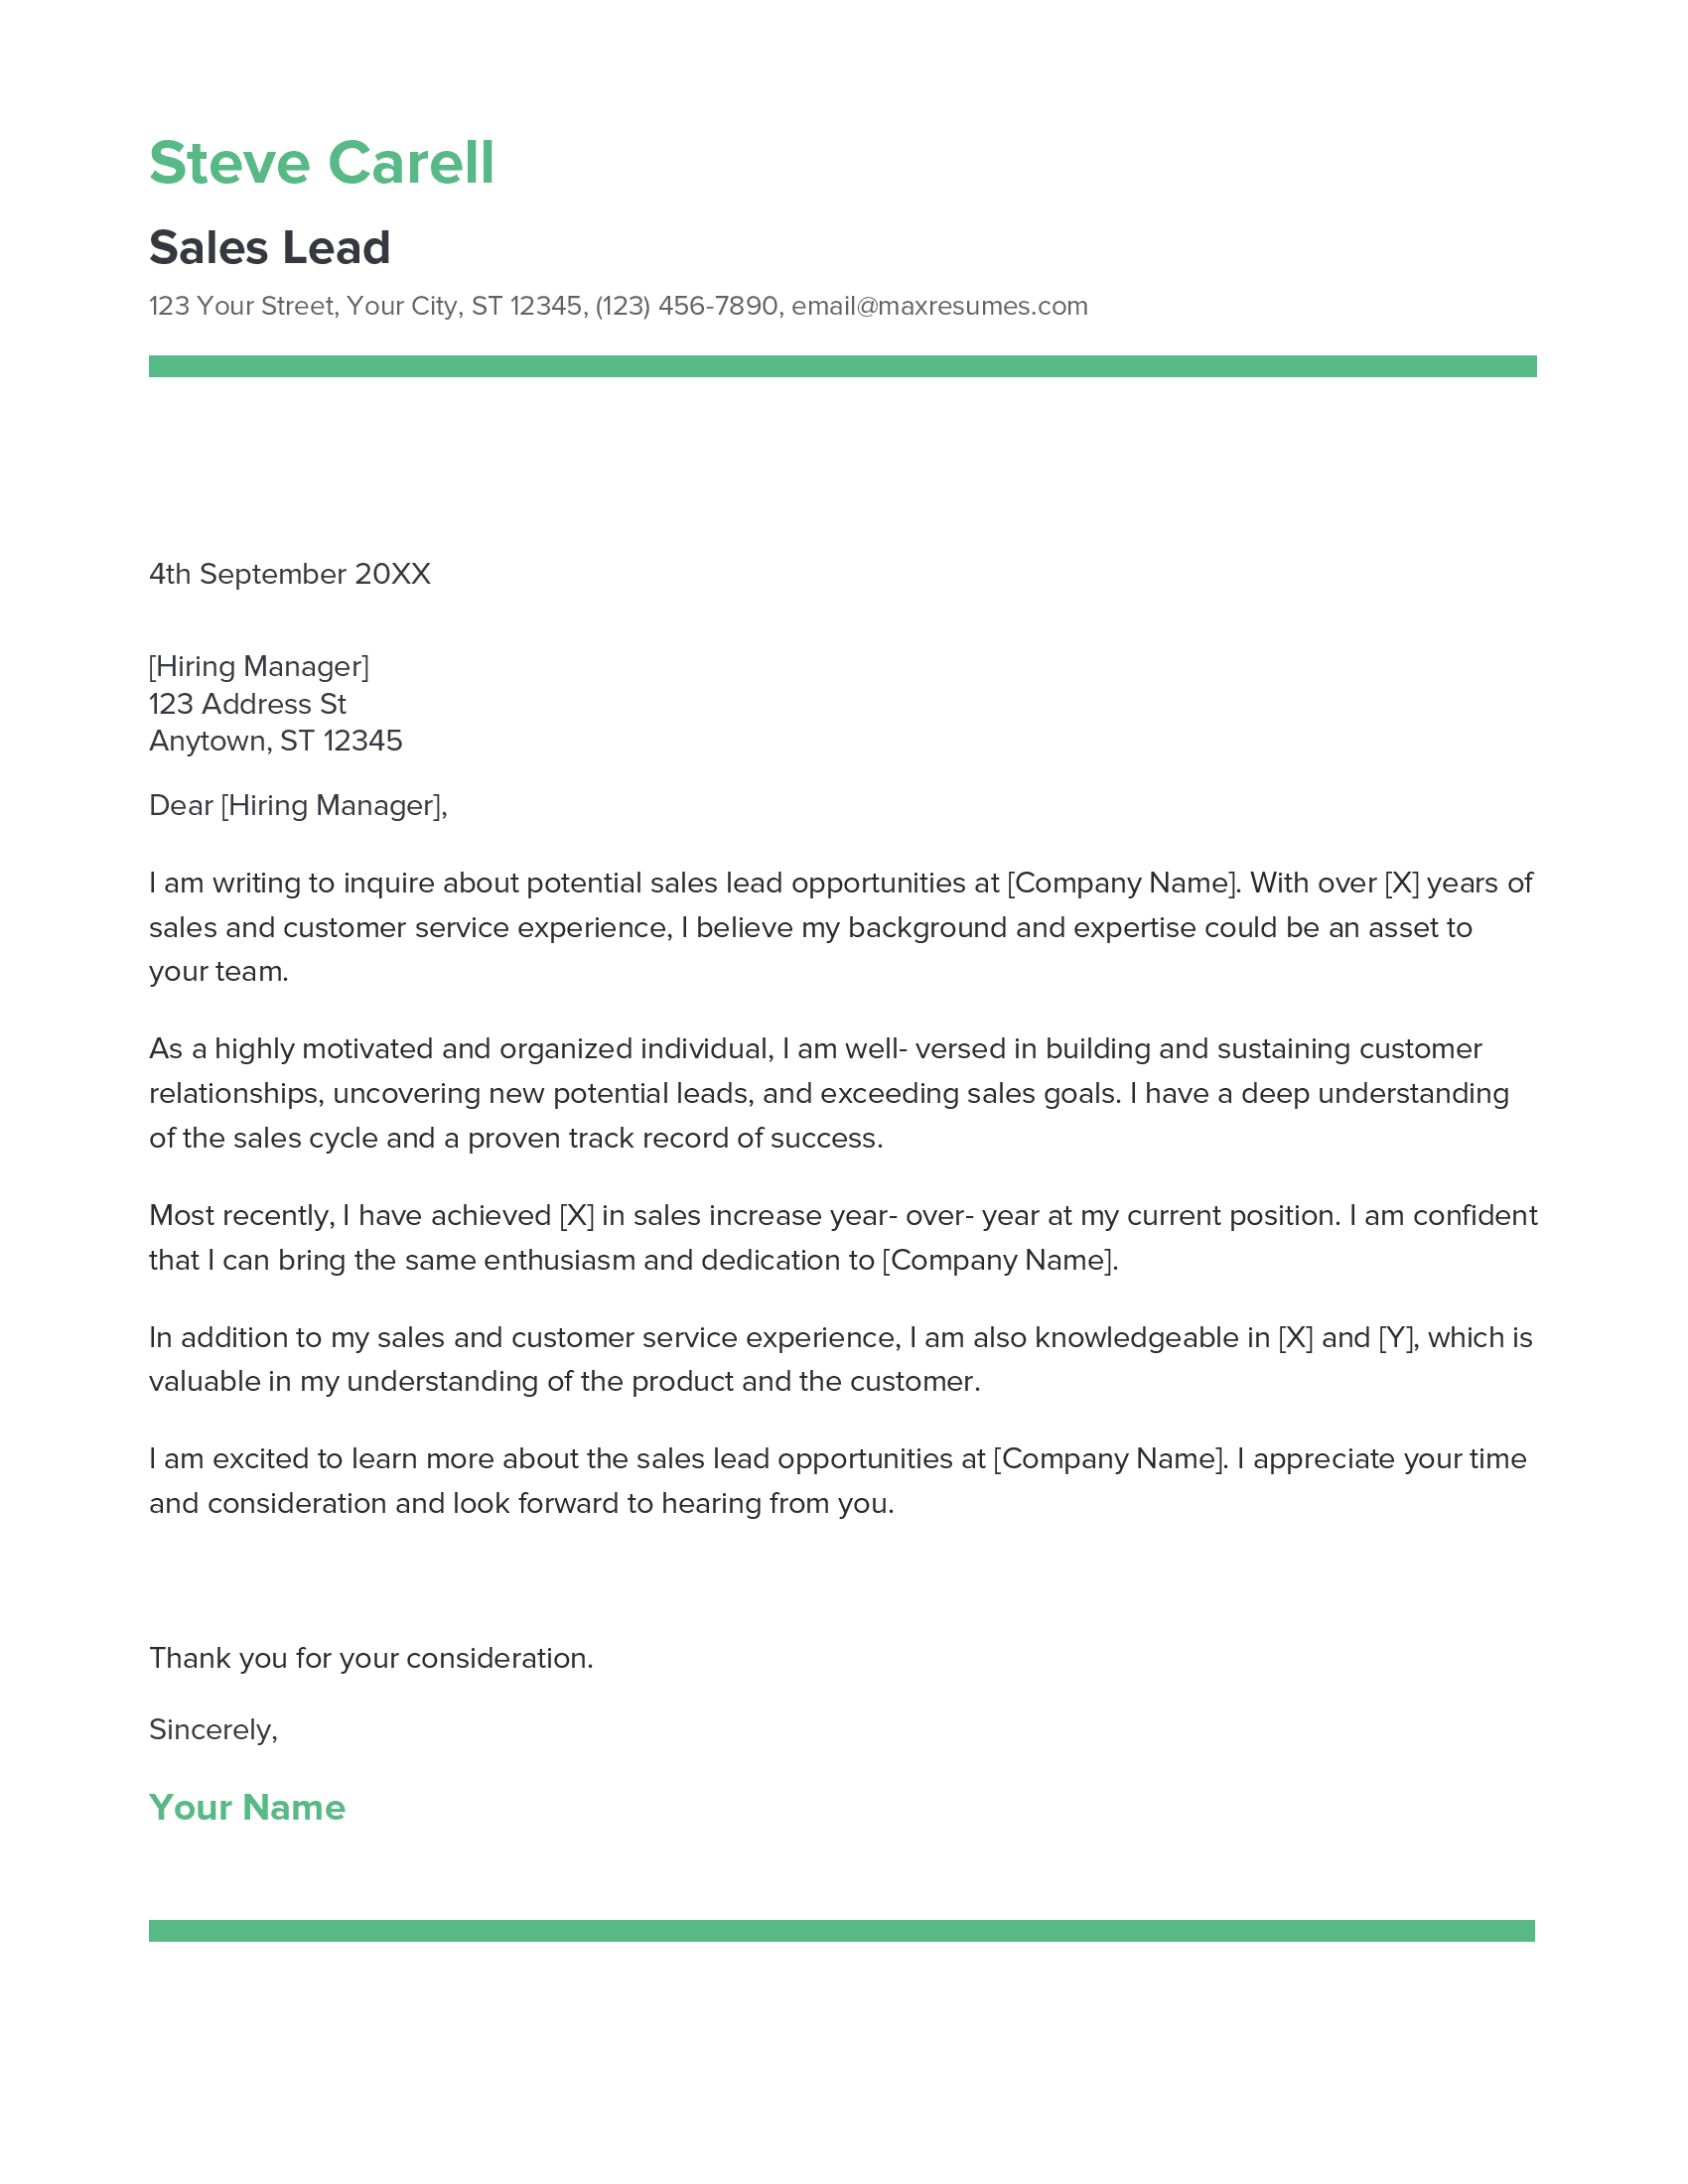 Sales Lead Cover Letter Example